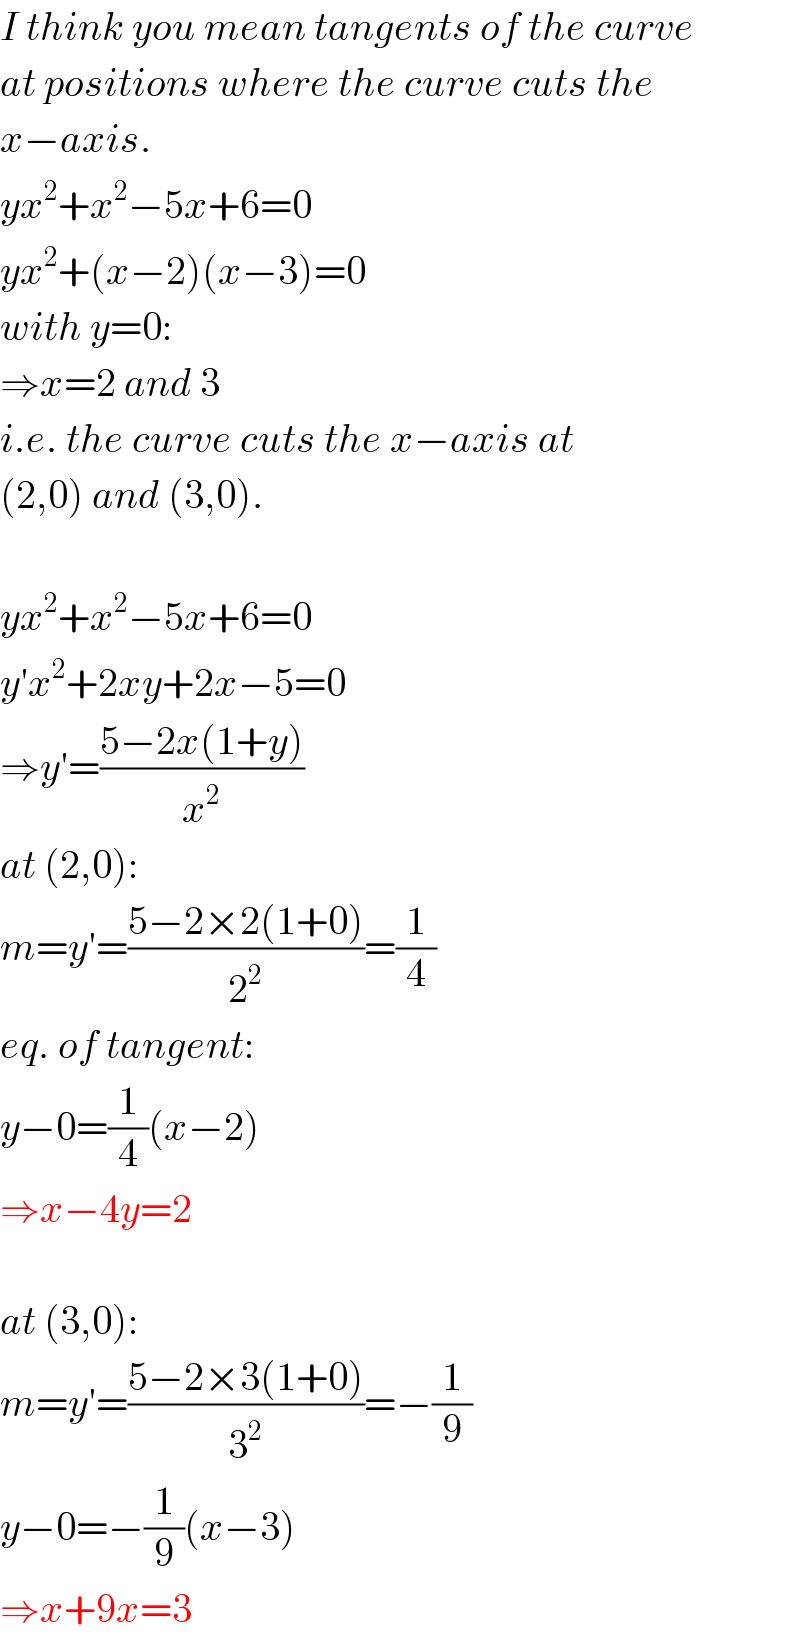 I think you mean tangents of the curve  at positions where the curve cuts the  x−axis.  yx^2 +x^2 −5x+6=0  yx^2 +(x−2)(x−3)=0  with y=0:  ⇒x=2 and 3  i.e. the curve cuts the x−axis at  (2,0) and (3,0).    yx^2 +x^2 −5x+6=0  y′x^2 +2xy+2x−5=0  ⇒y′=((5−2x(1+y))/x^2 )  at (2,0):  m=y′=((5−2×2(1+0))/2^2 )=(1/4)  eq. of tangent:  y−0=(1/4)(x−2)  ⇒x−4y=2    at (3,0):  m=y′=((5−2×3(1+0))/3^2 )=−(1/9)  y−0=−(1/9)(x−3)  ⇒x+9x=3  